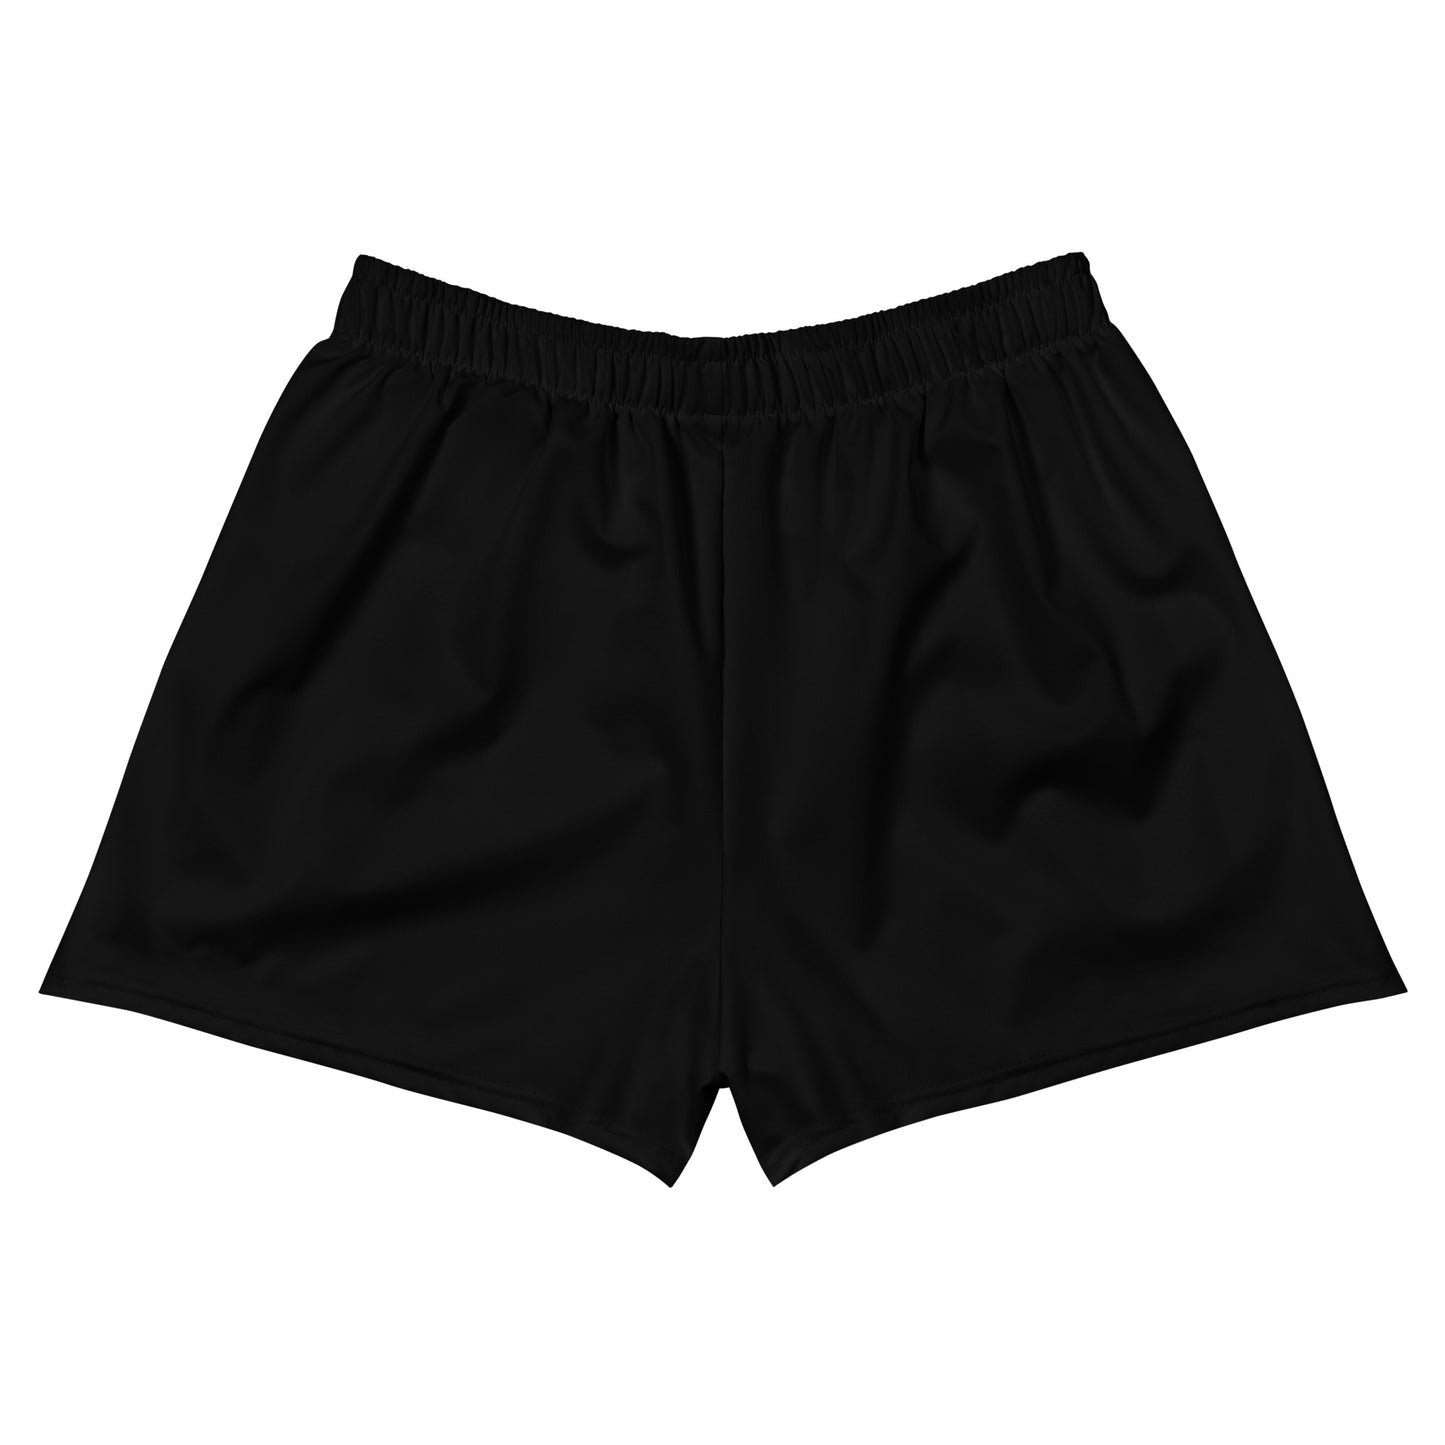 Brand Official Savage Mike Women's Athletic Shorts